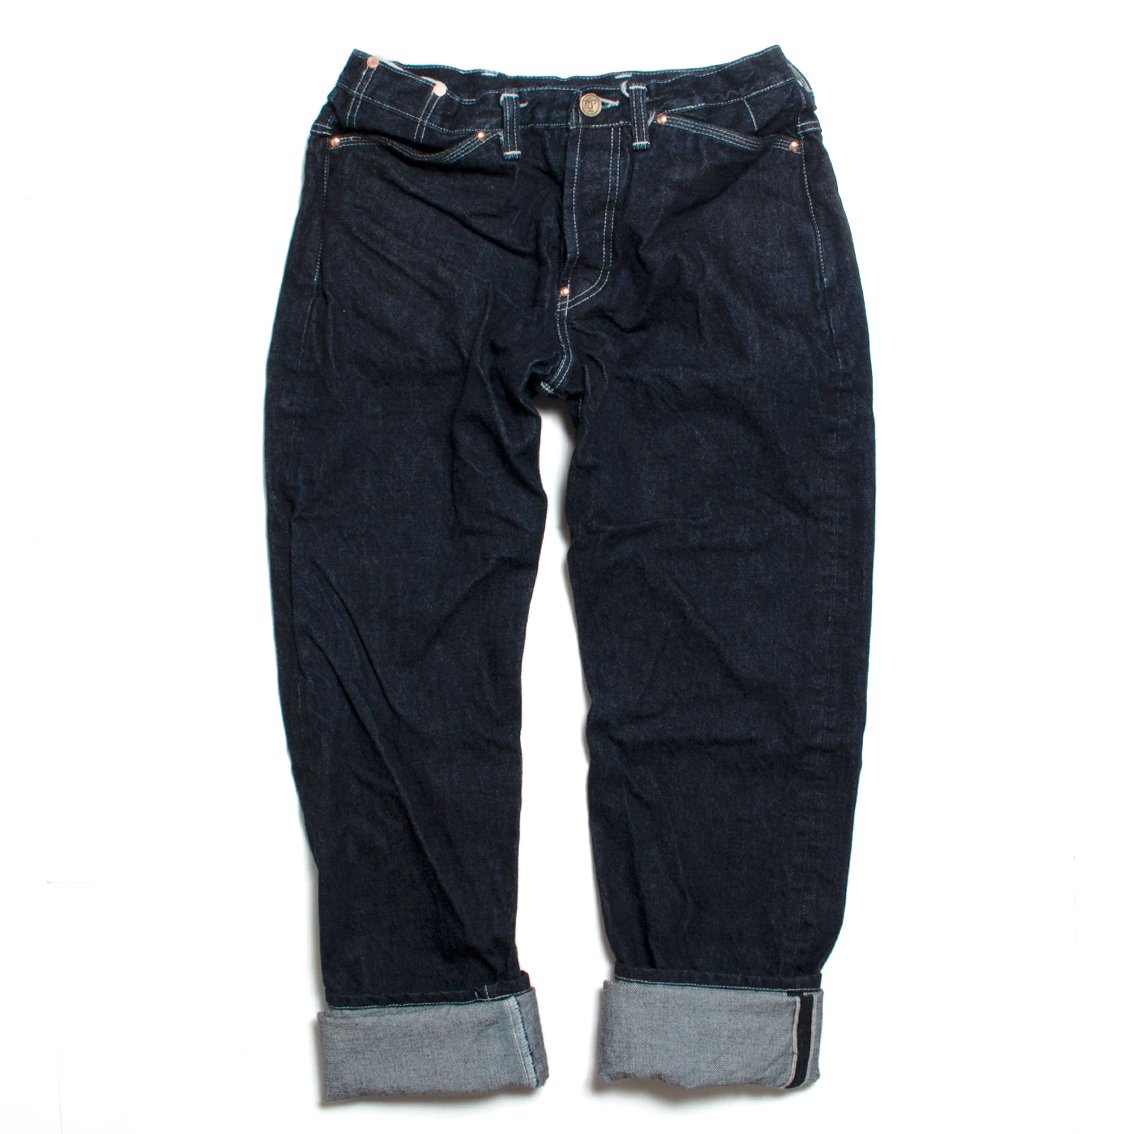 TENDER Co. / テンダー] TYPE 130 RINCE TAPERED JEANS テーパード ...